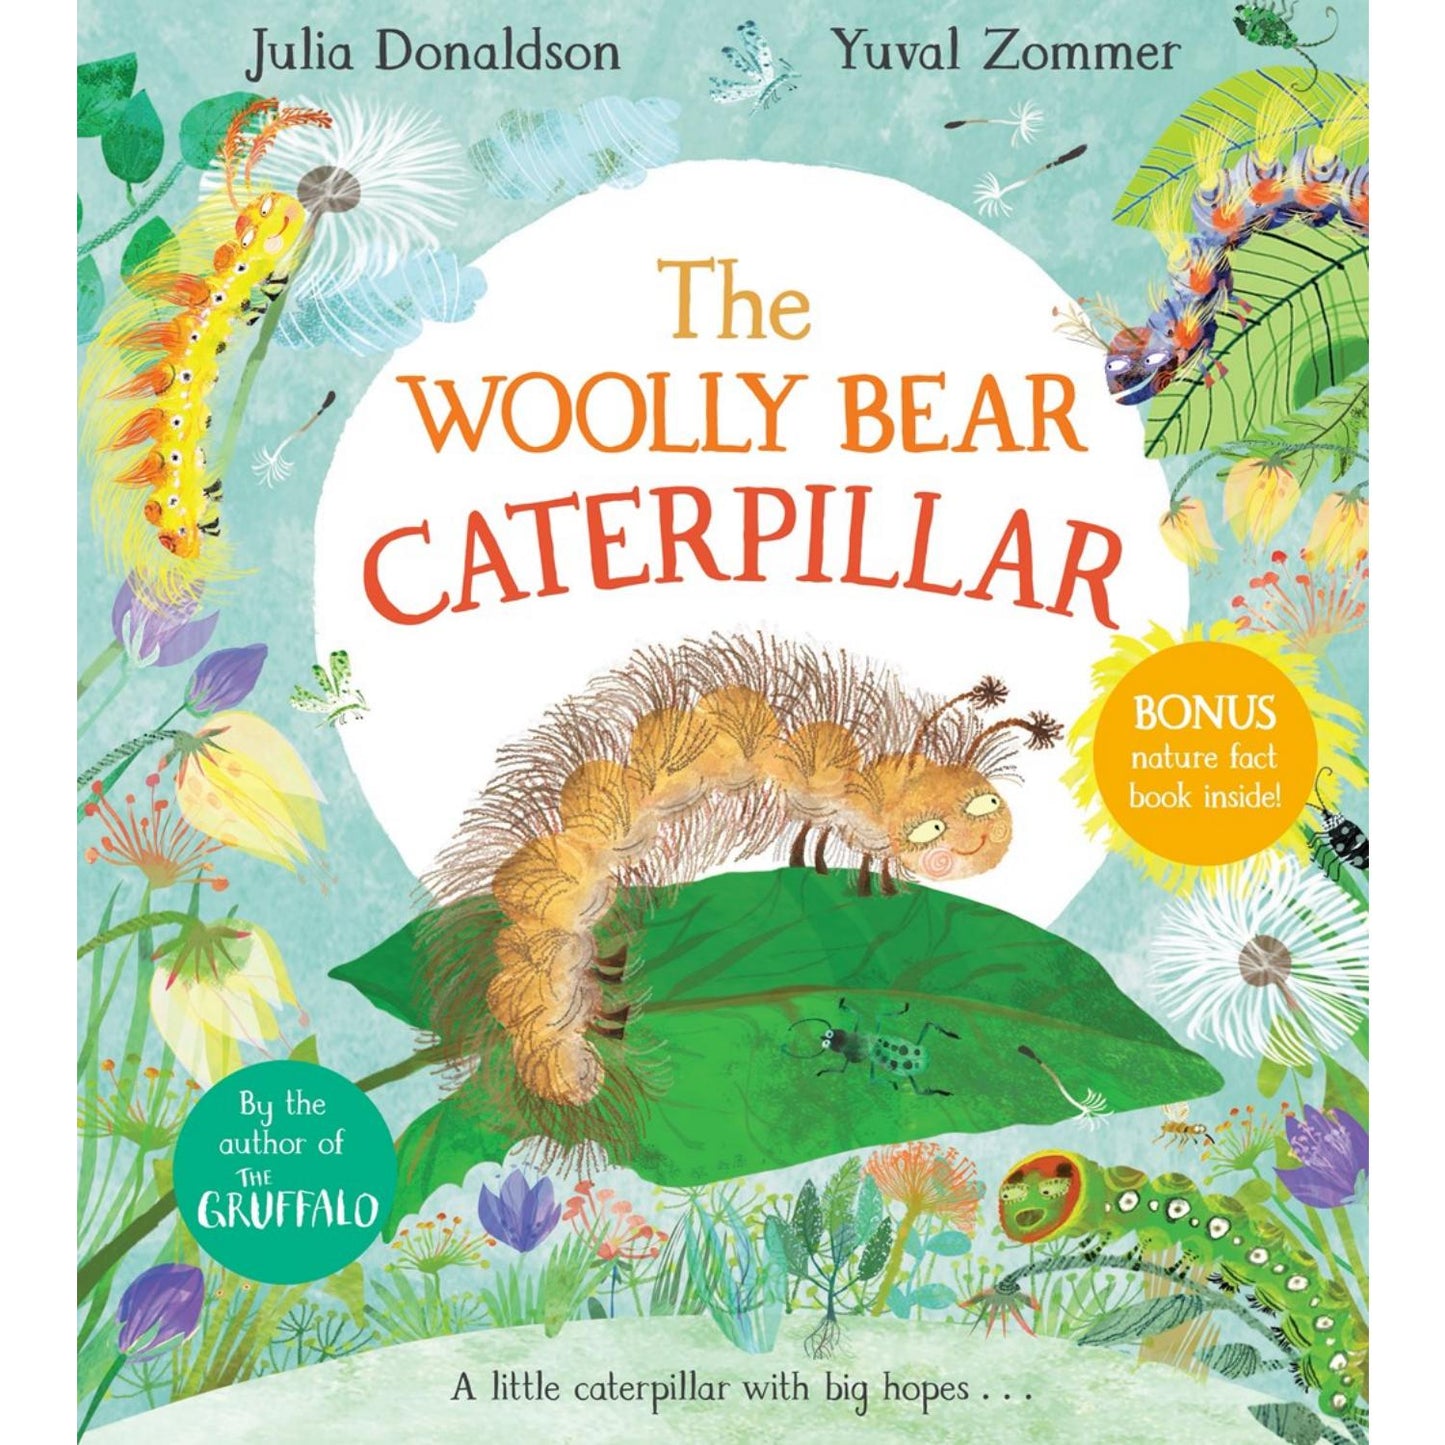 The Woolly Bear Caterpillar | Children’s Book on Self-Esteem & Self-Respect | Hardcover | Signed by the Authors